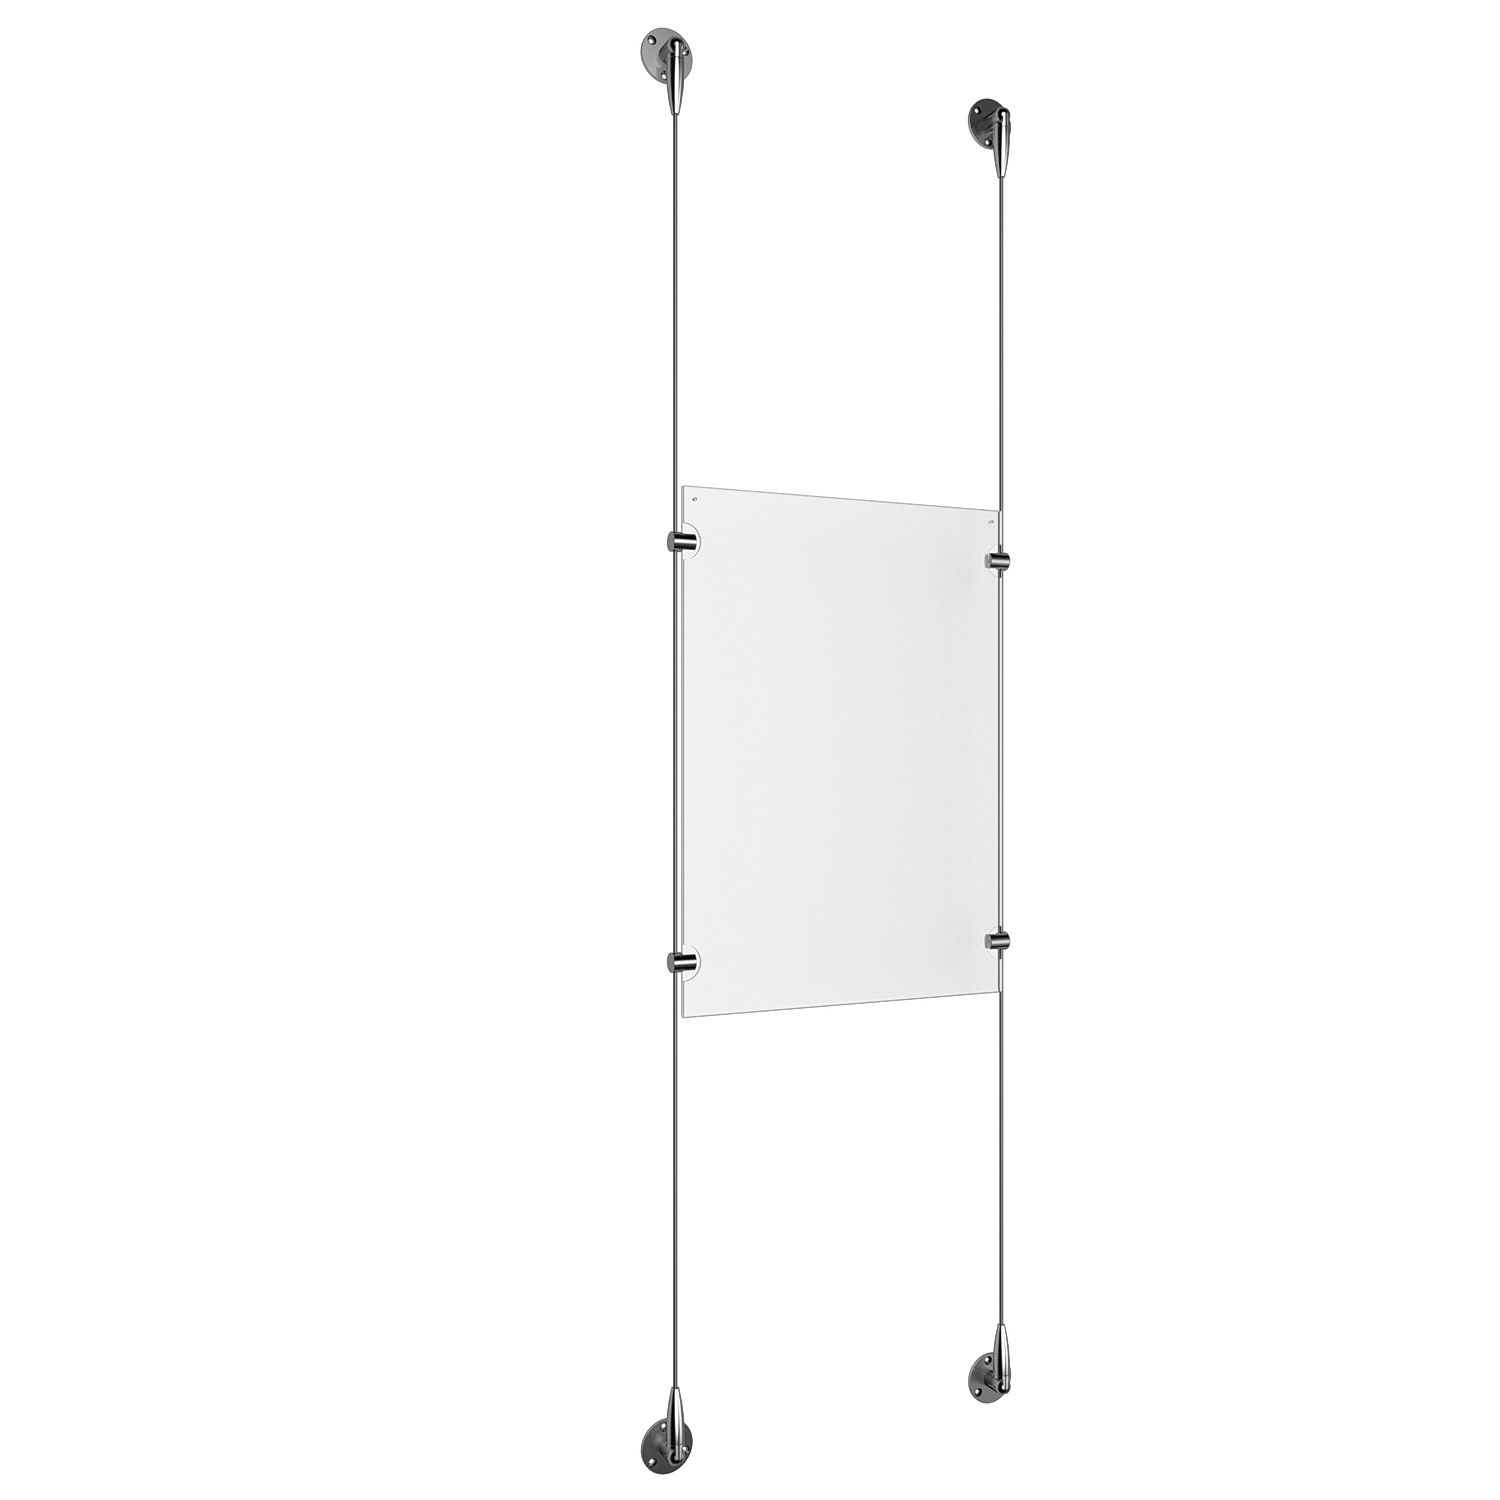 (1) 11'' Width x 17'' Height Clear Acrylic Frame & (2) Aluminum Clear Anodized Adjustable Angle Signature 1/8'' Diameter Cable Systems with (4) Single-Sided Panel Grippers